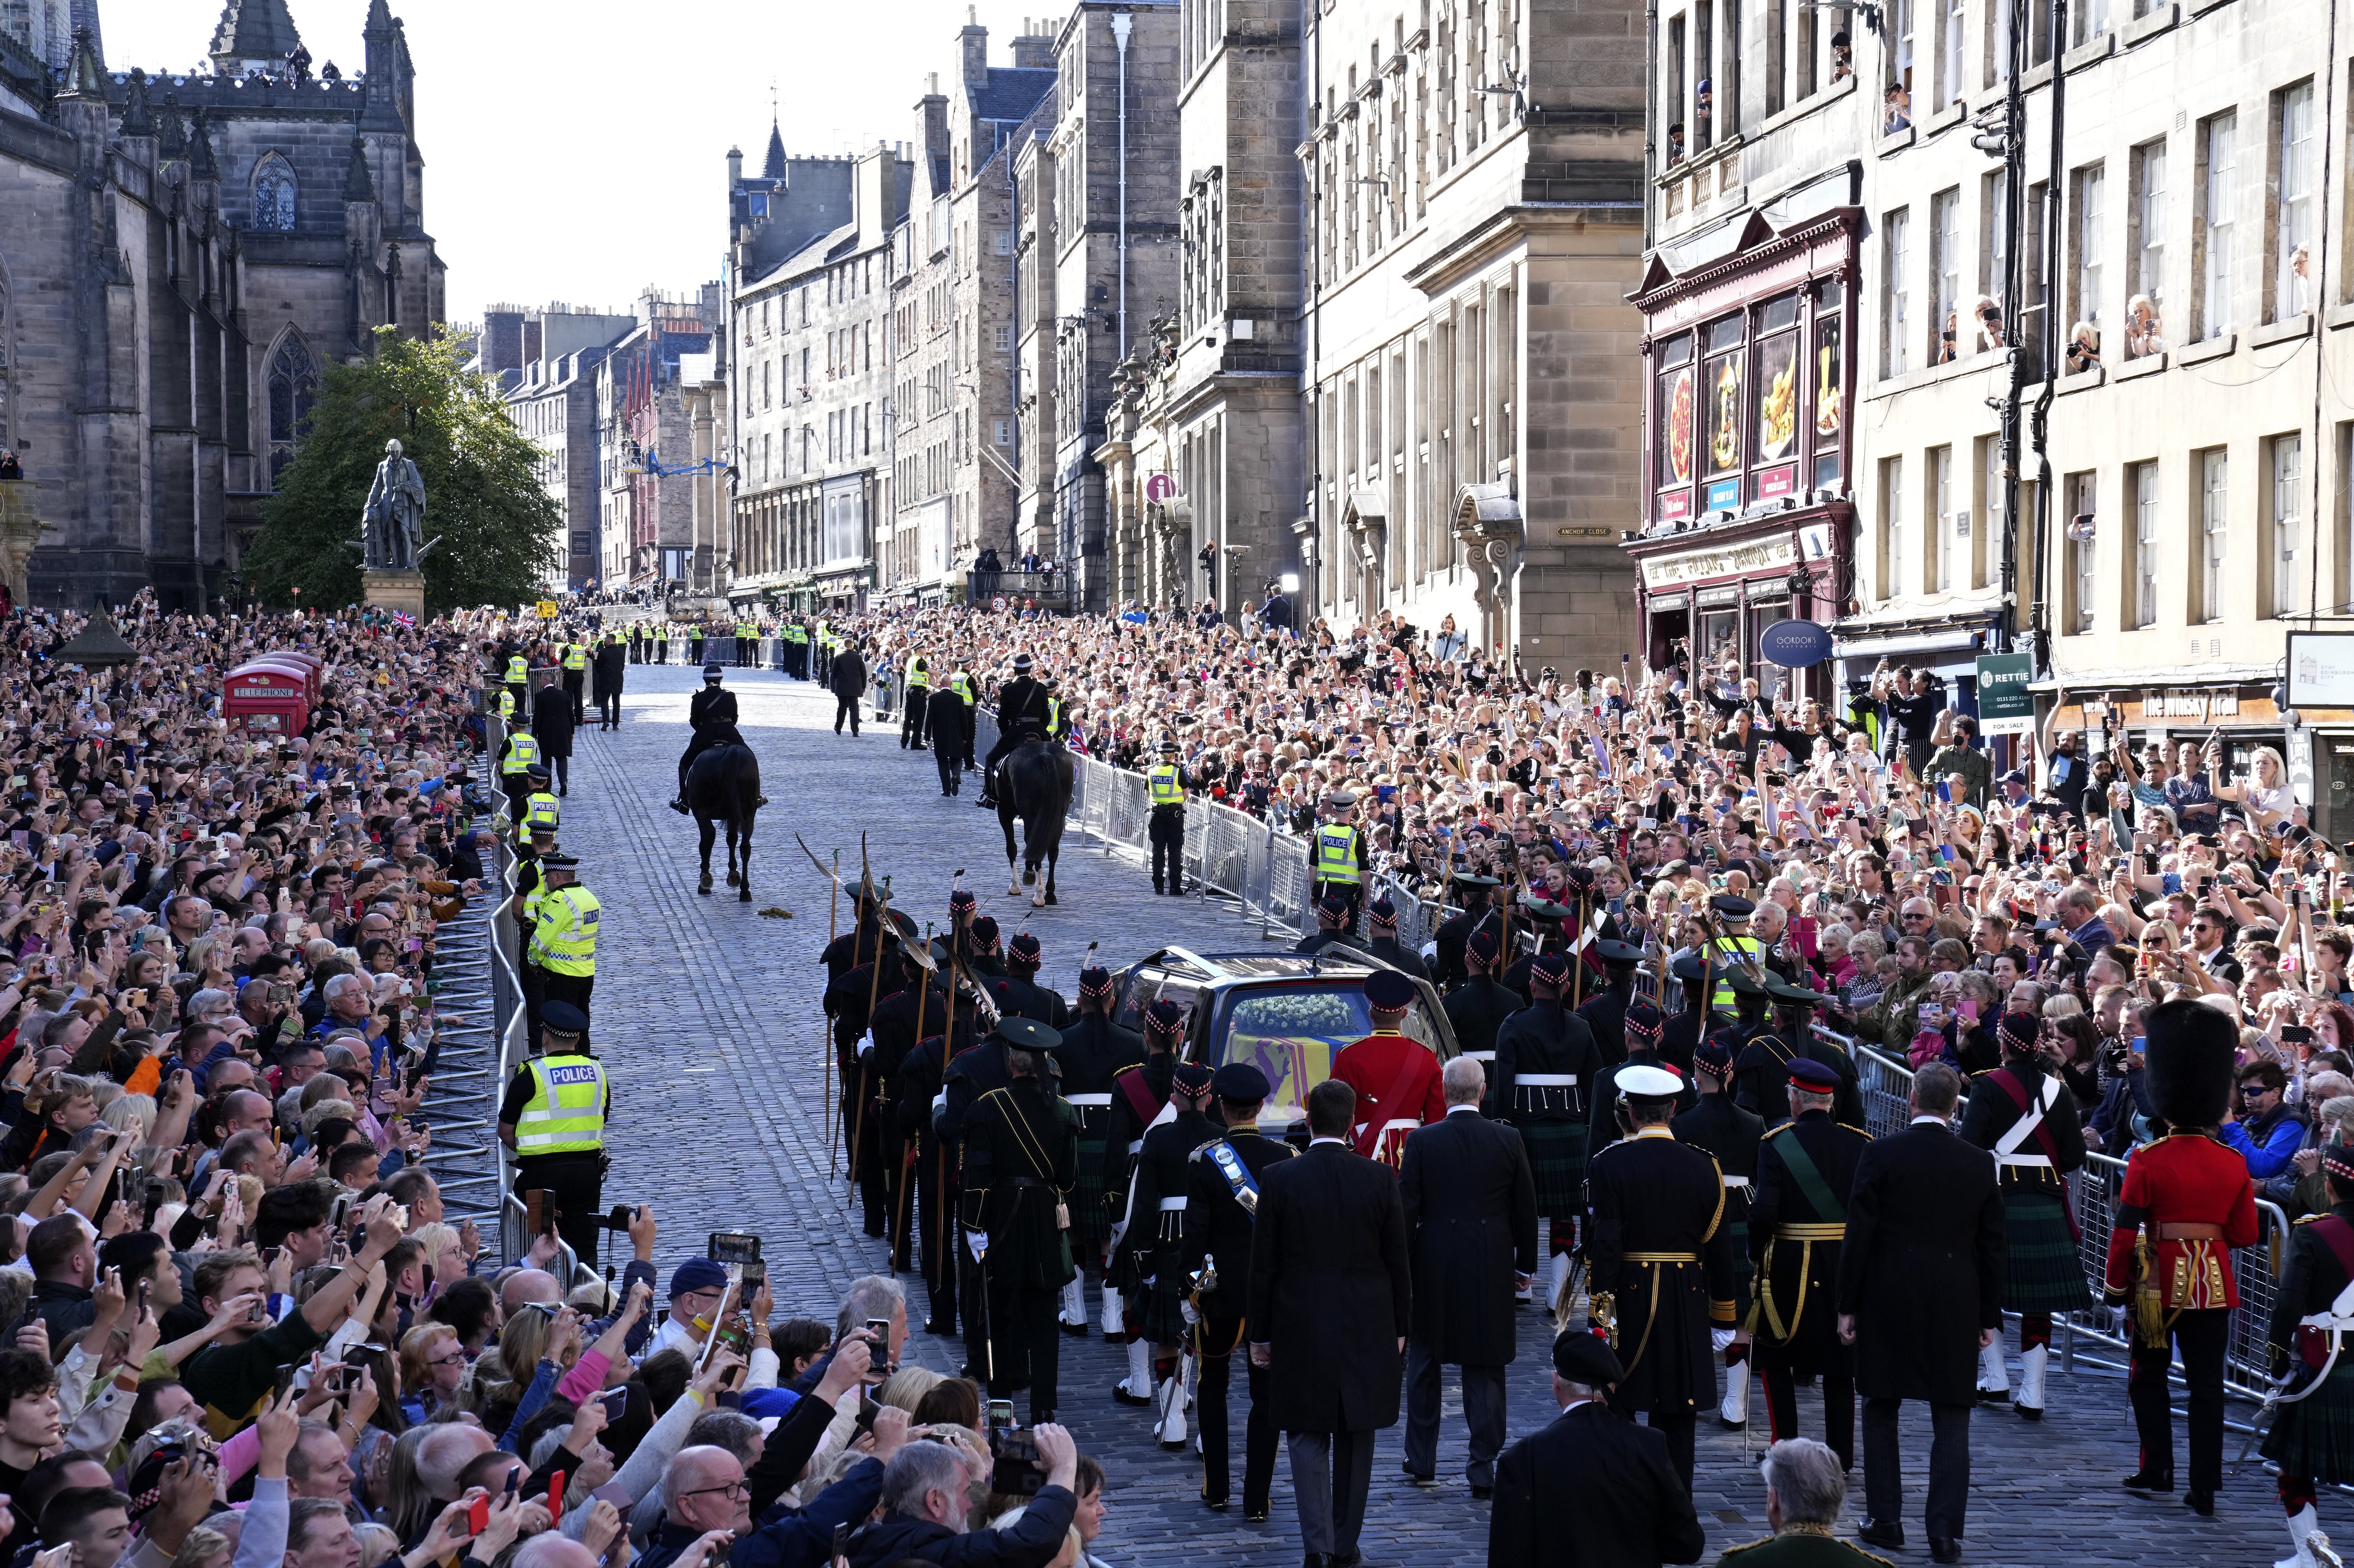 The procession of the Queen’s coffin from the Palace of Holyroodhouse to St Giles’ Cathedral moves along the Royal Mile (Jane Barlow/PA)